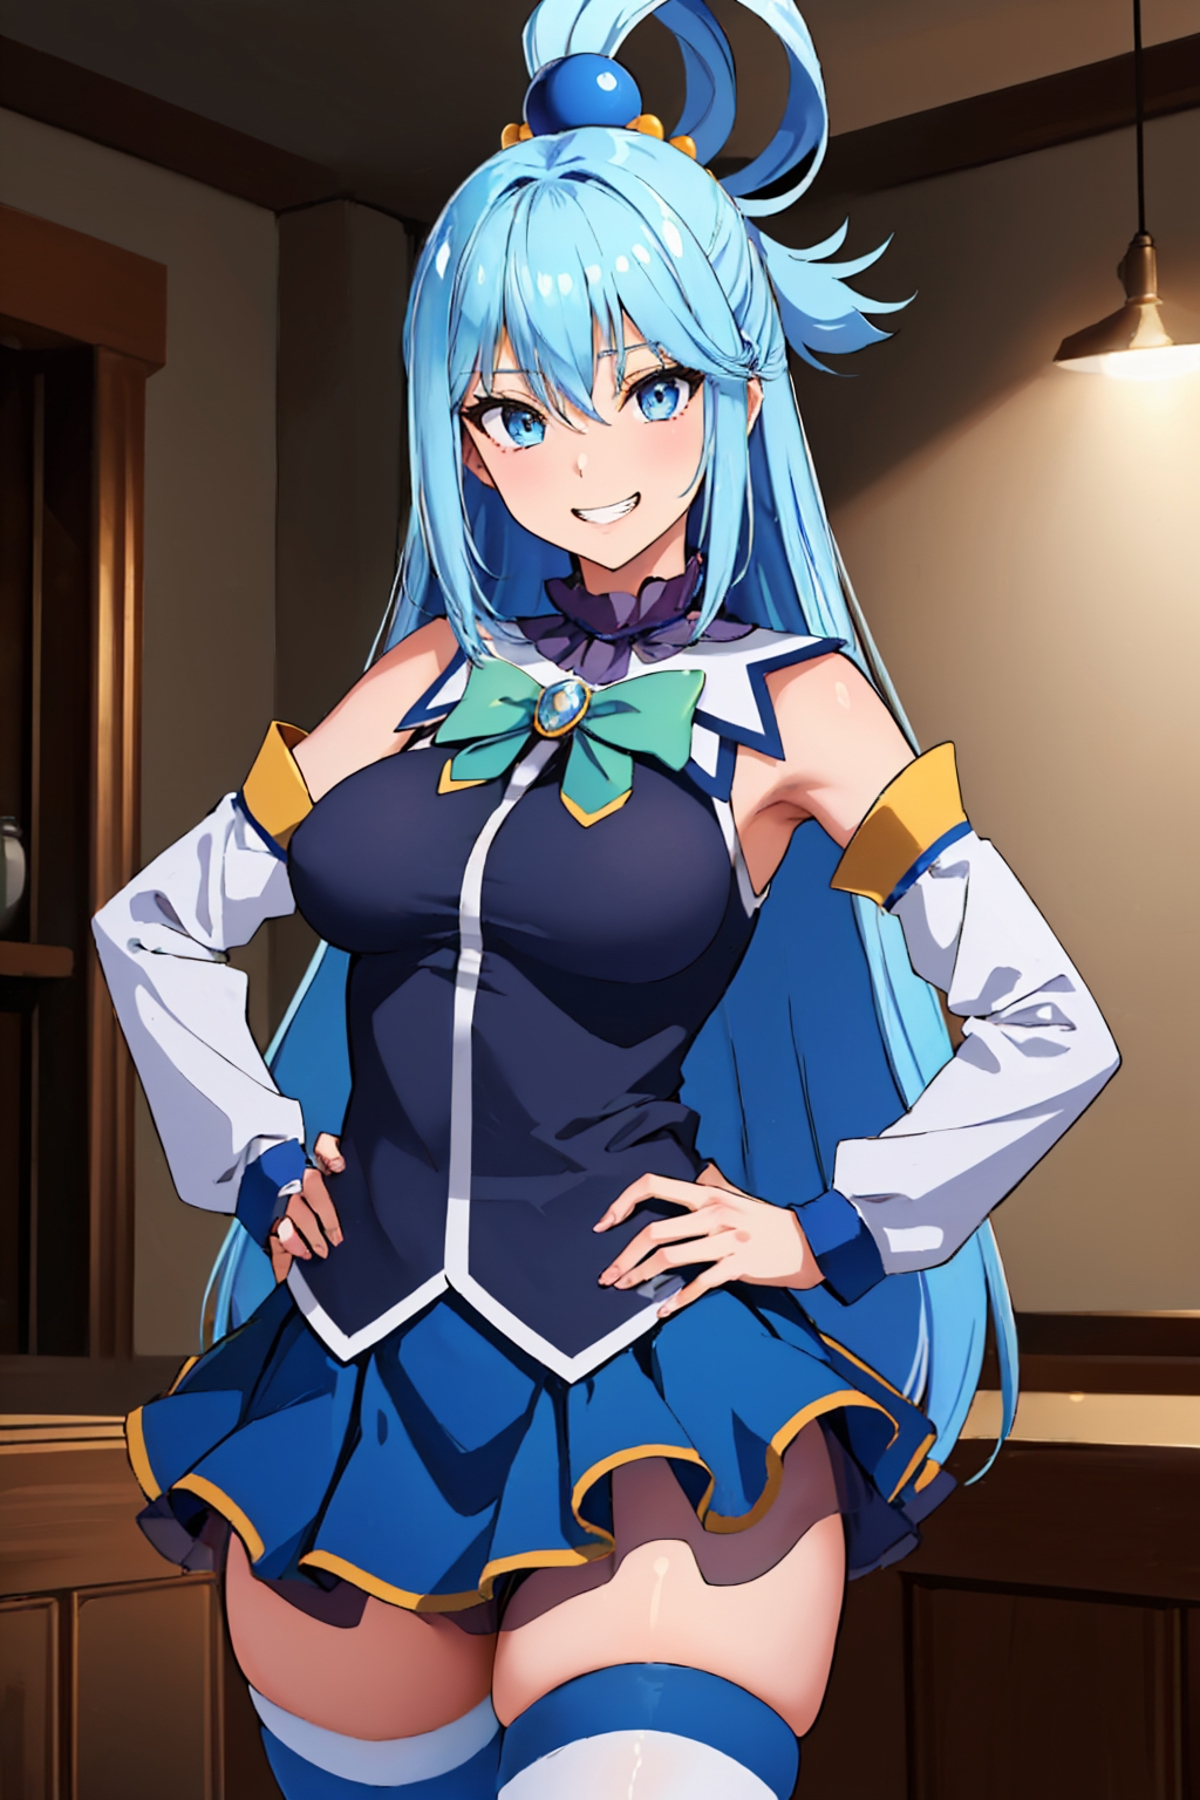 A cartoon woman wearing a blue, white, and yellow uniform with blue hair and bright blue eyes.